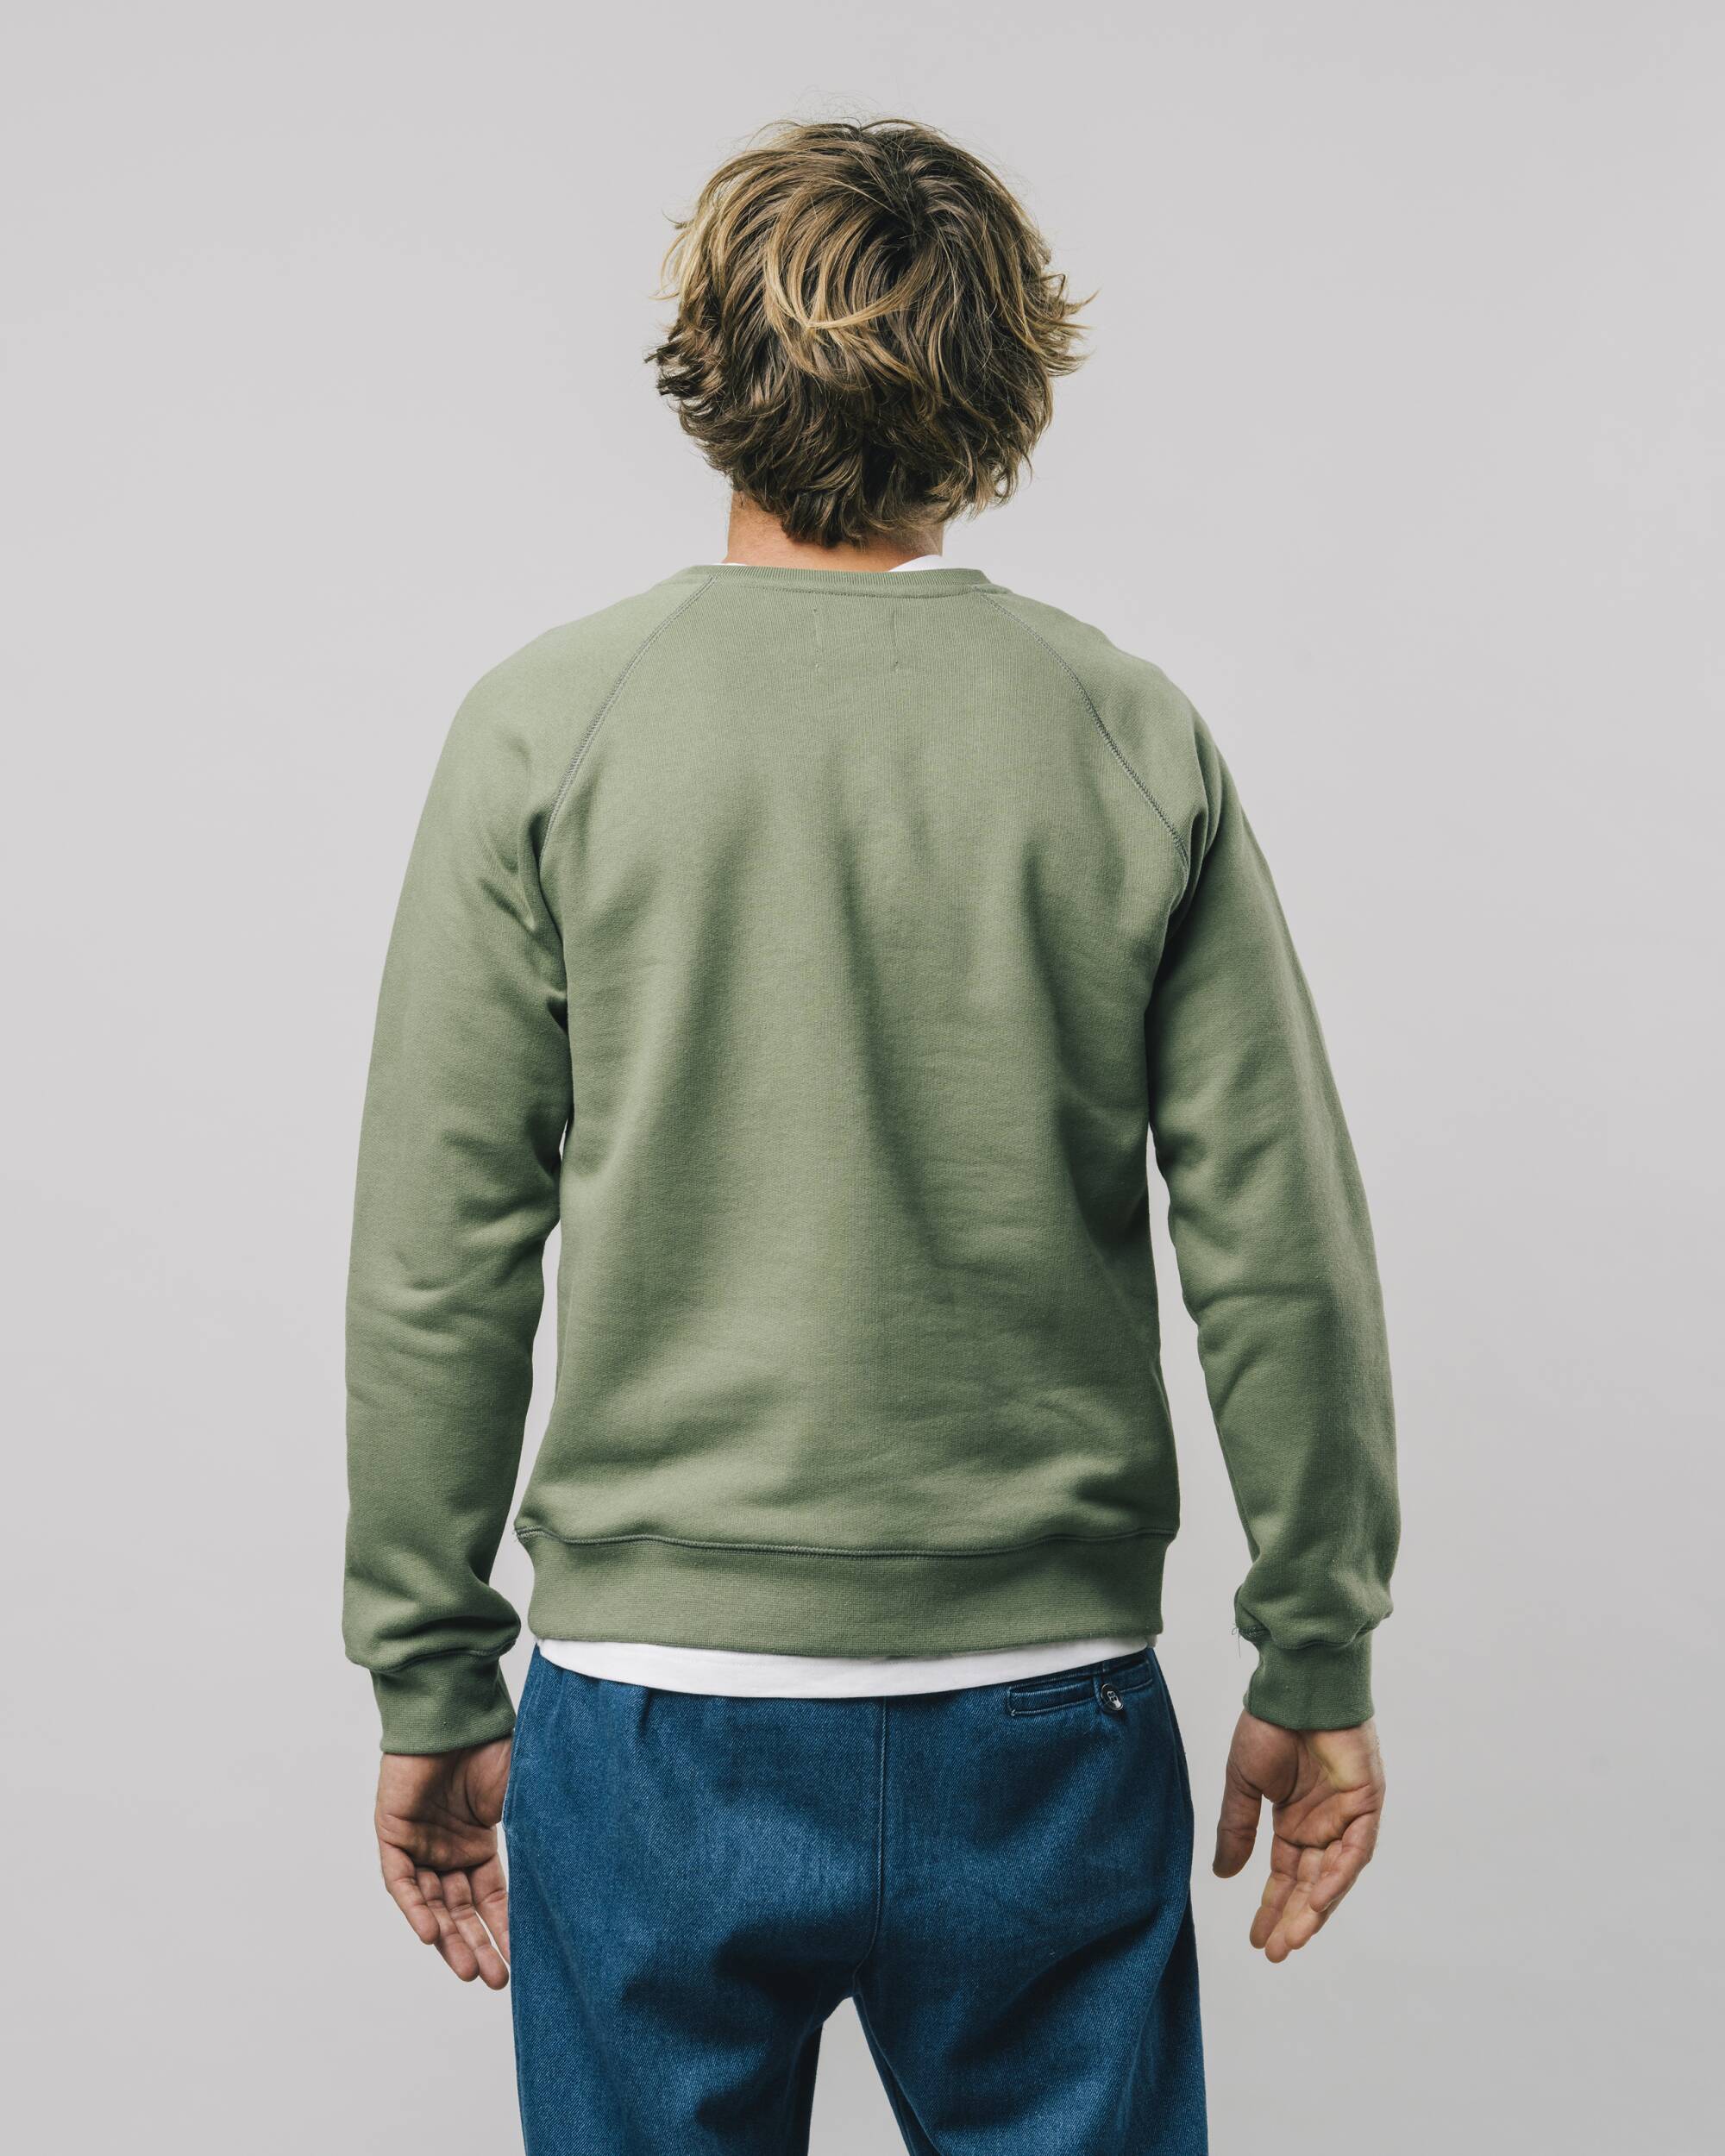 Sweatshirt "The Hiker" in green / olive made from 100% organic cotton from Brava Fabrics